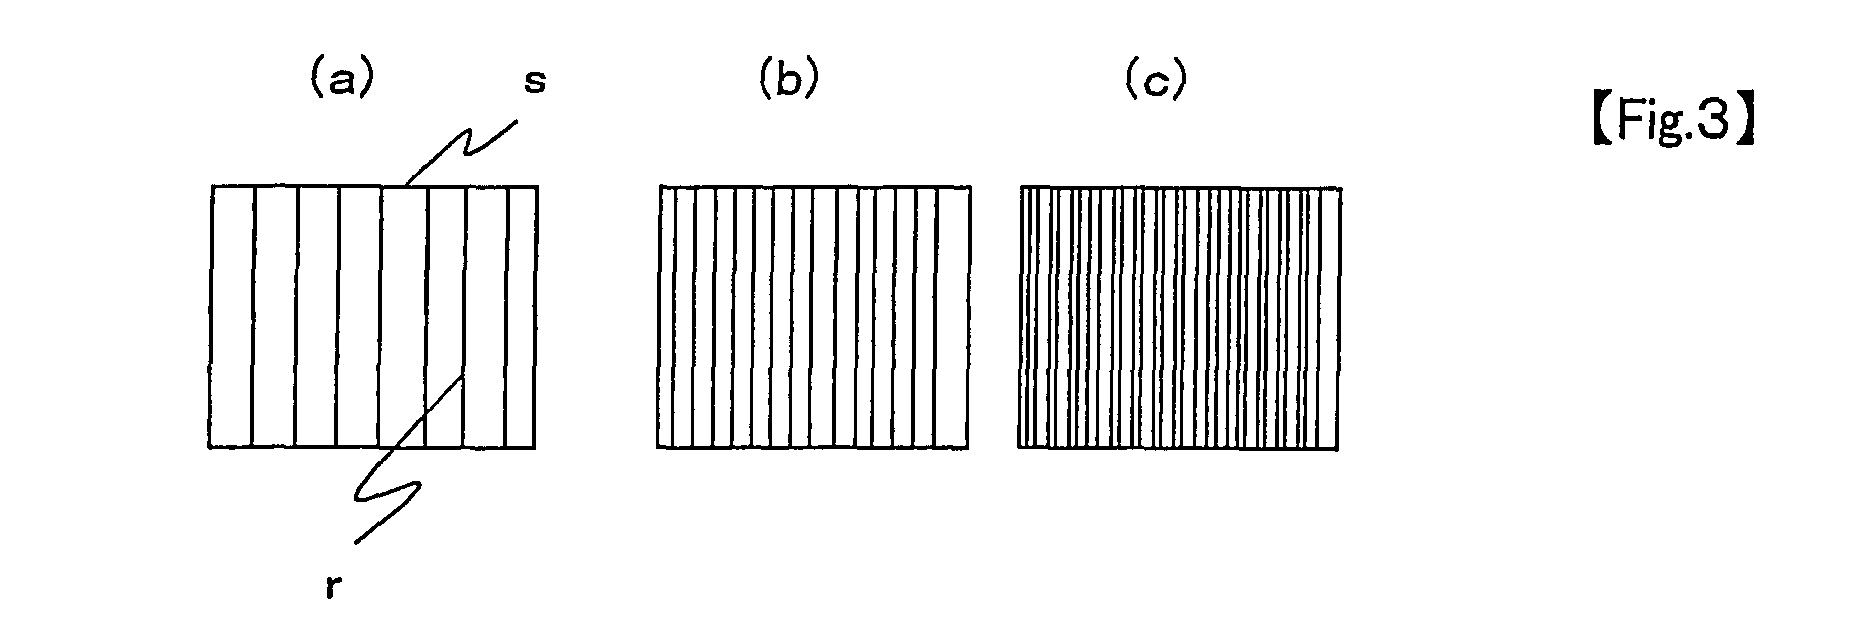 Image forming apparatus and method for controlling image density thereof